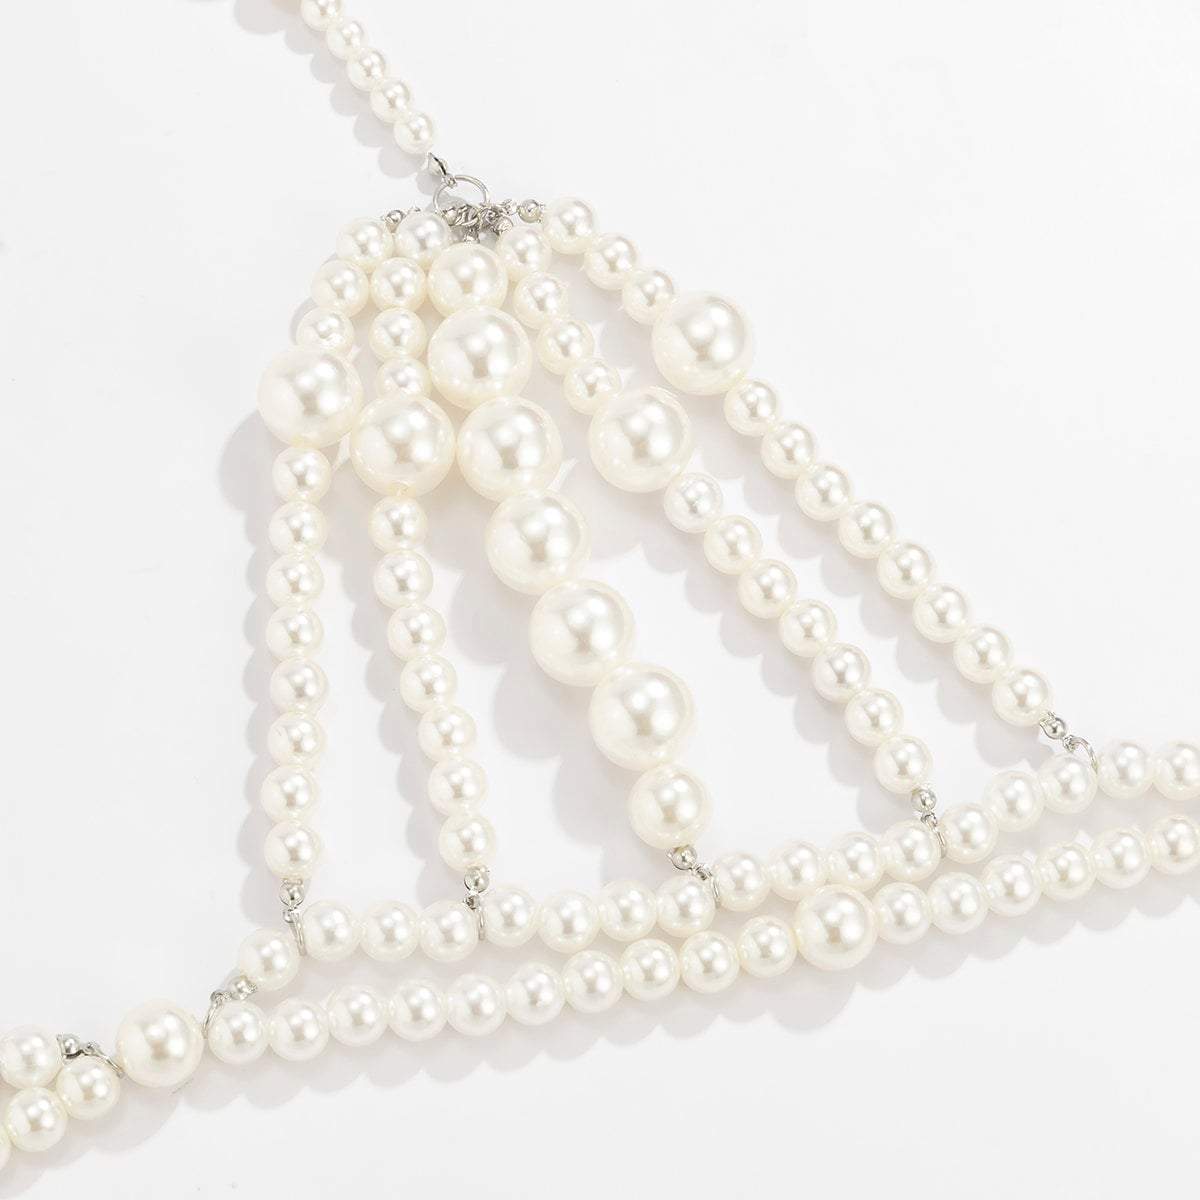 Hollow Beaded Pearl Backless Body Chain Bra